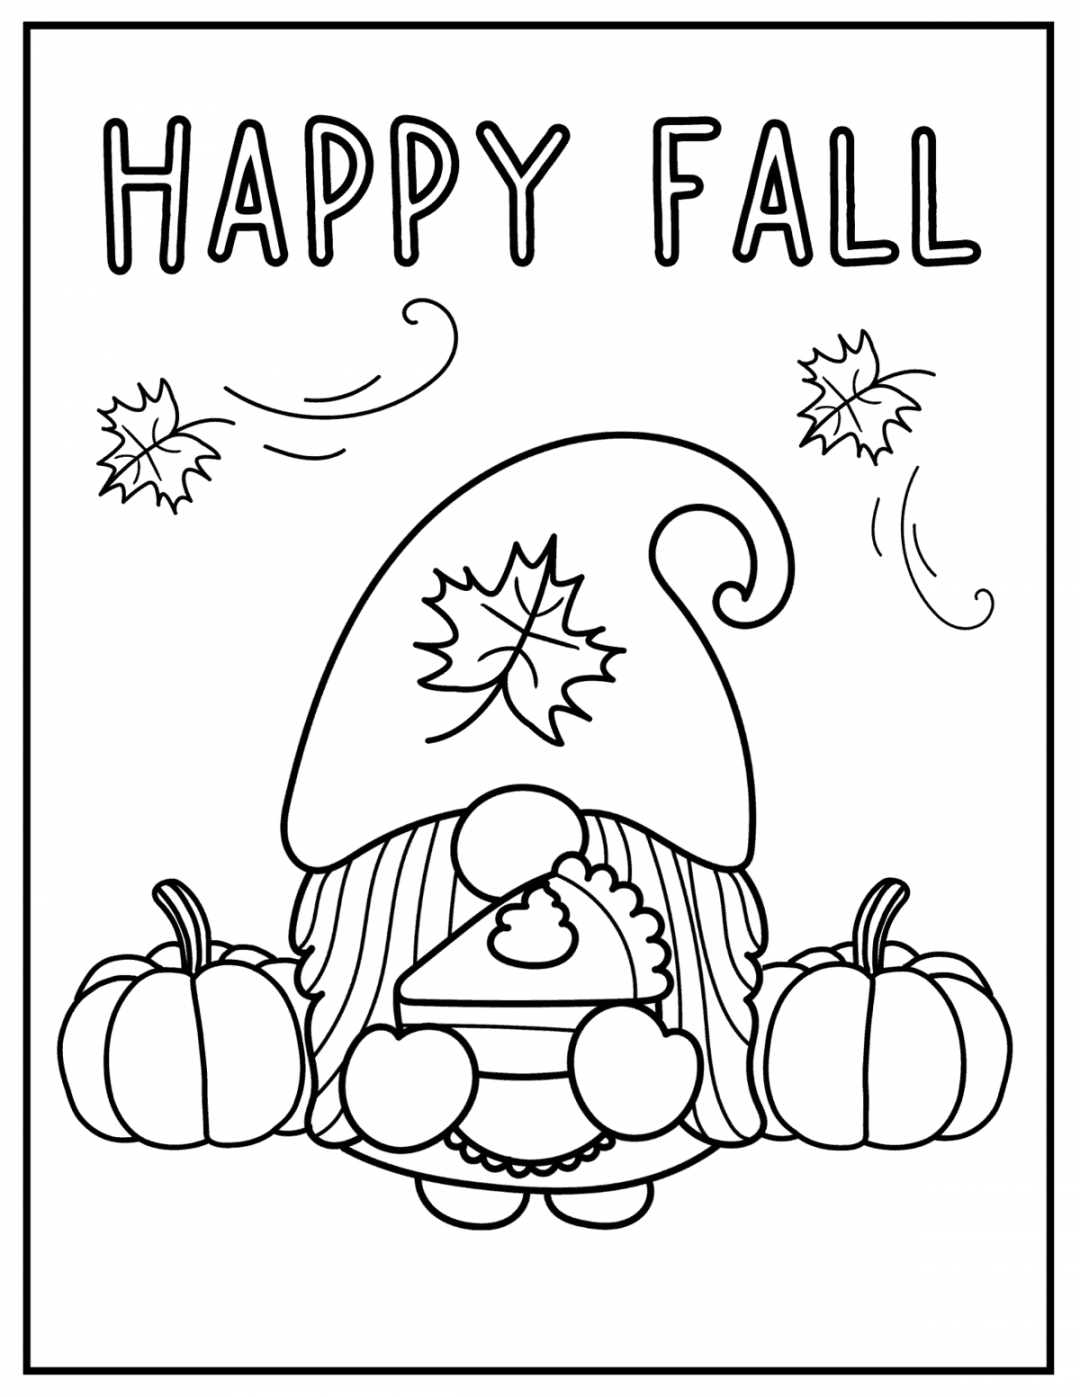 Fall Coloring Pages Free Printable - Printable -  Free Printable Fall Coloring Pages - Prudent Penny Pincher